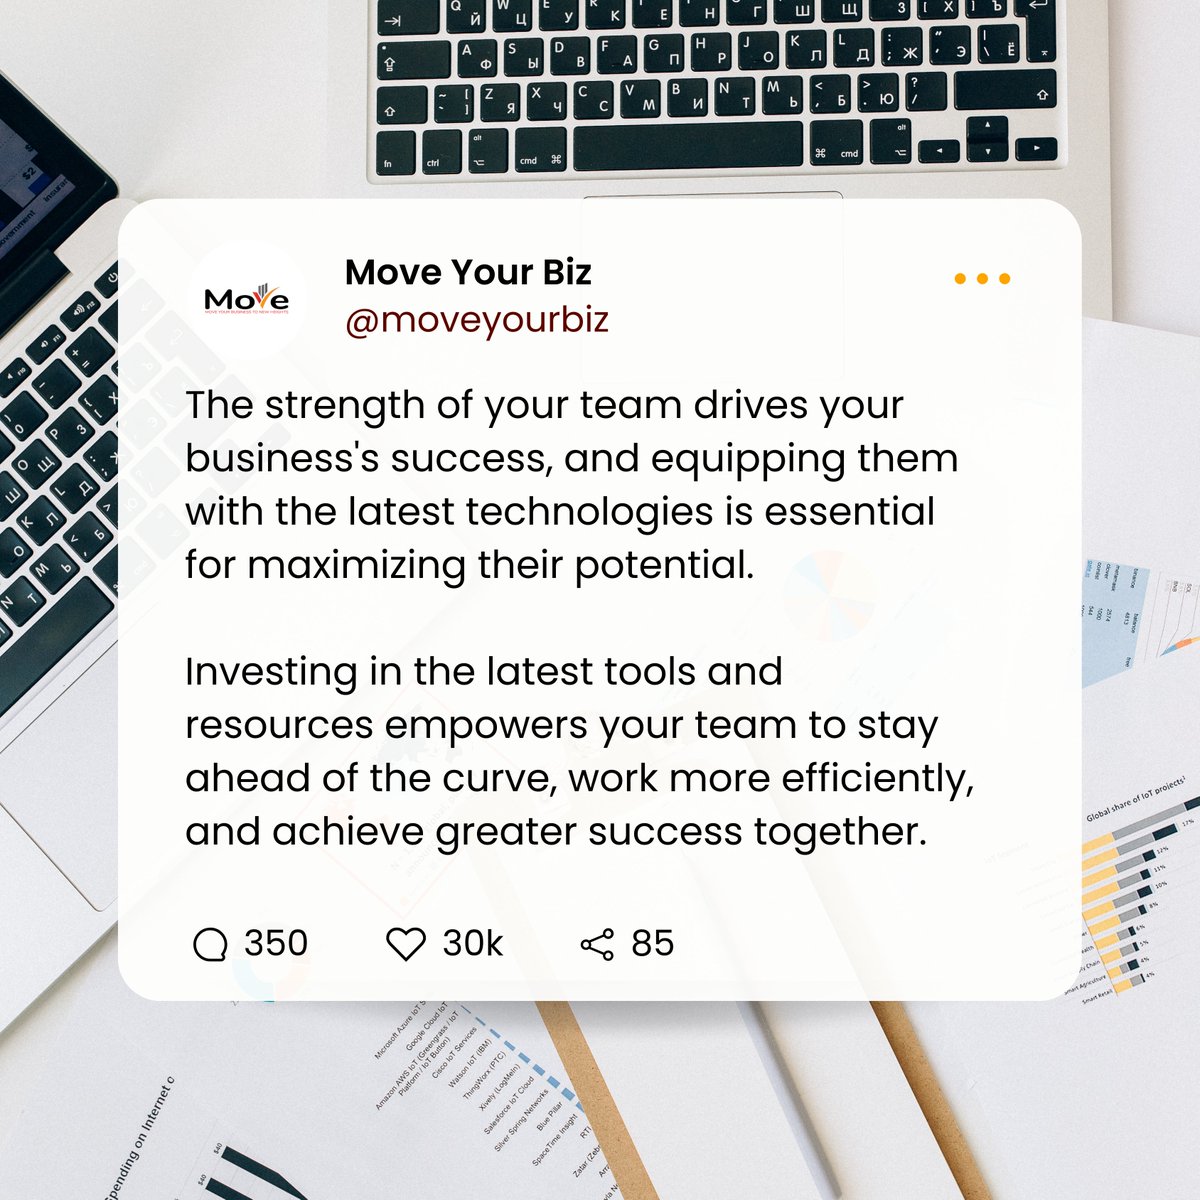 Let's challenge the misconception that remote work hampers productivity. Remote teams thrive with fewer distractions and personalized work environments.

Book a discovery call today!

🔗: moveyourbiz.com/contact/

#RemoteWork #Productivity #RemoteTeams